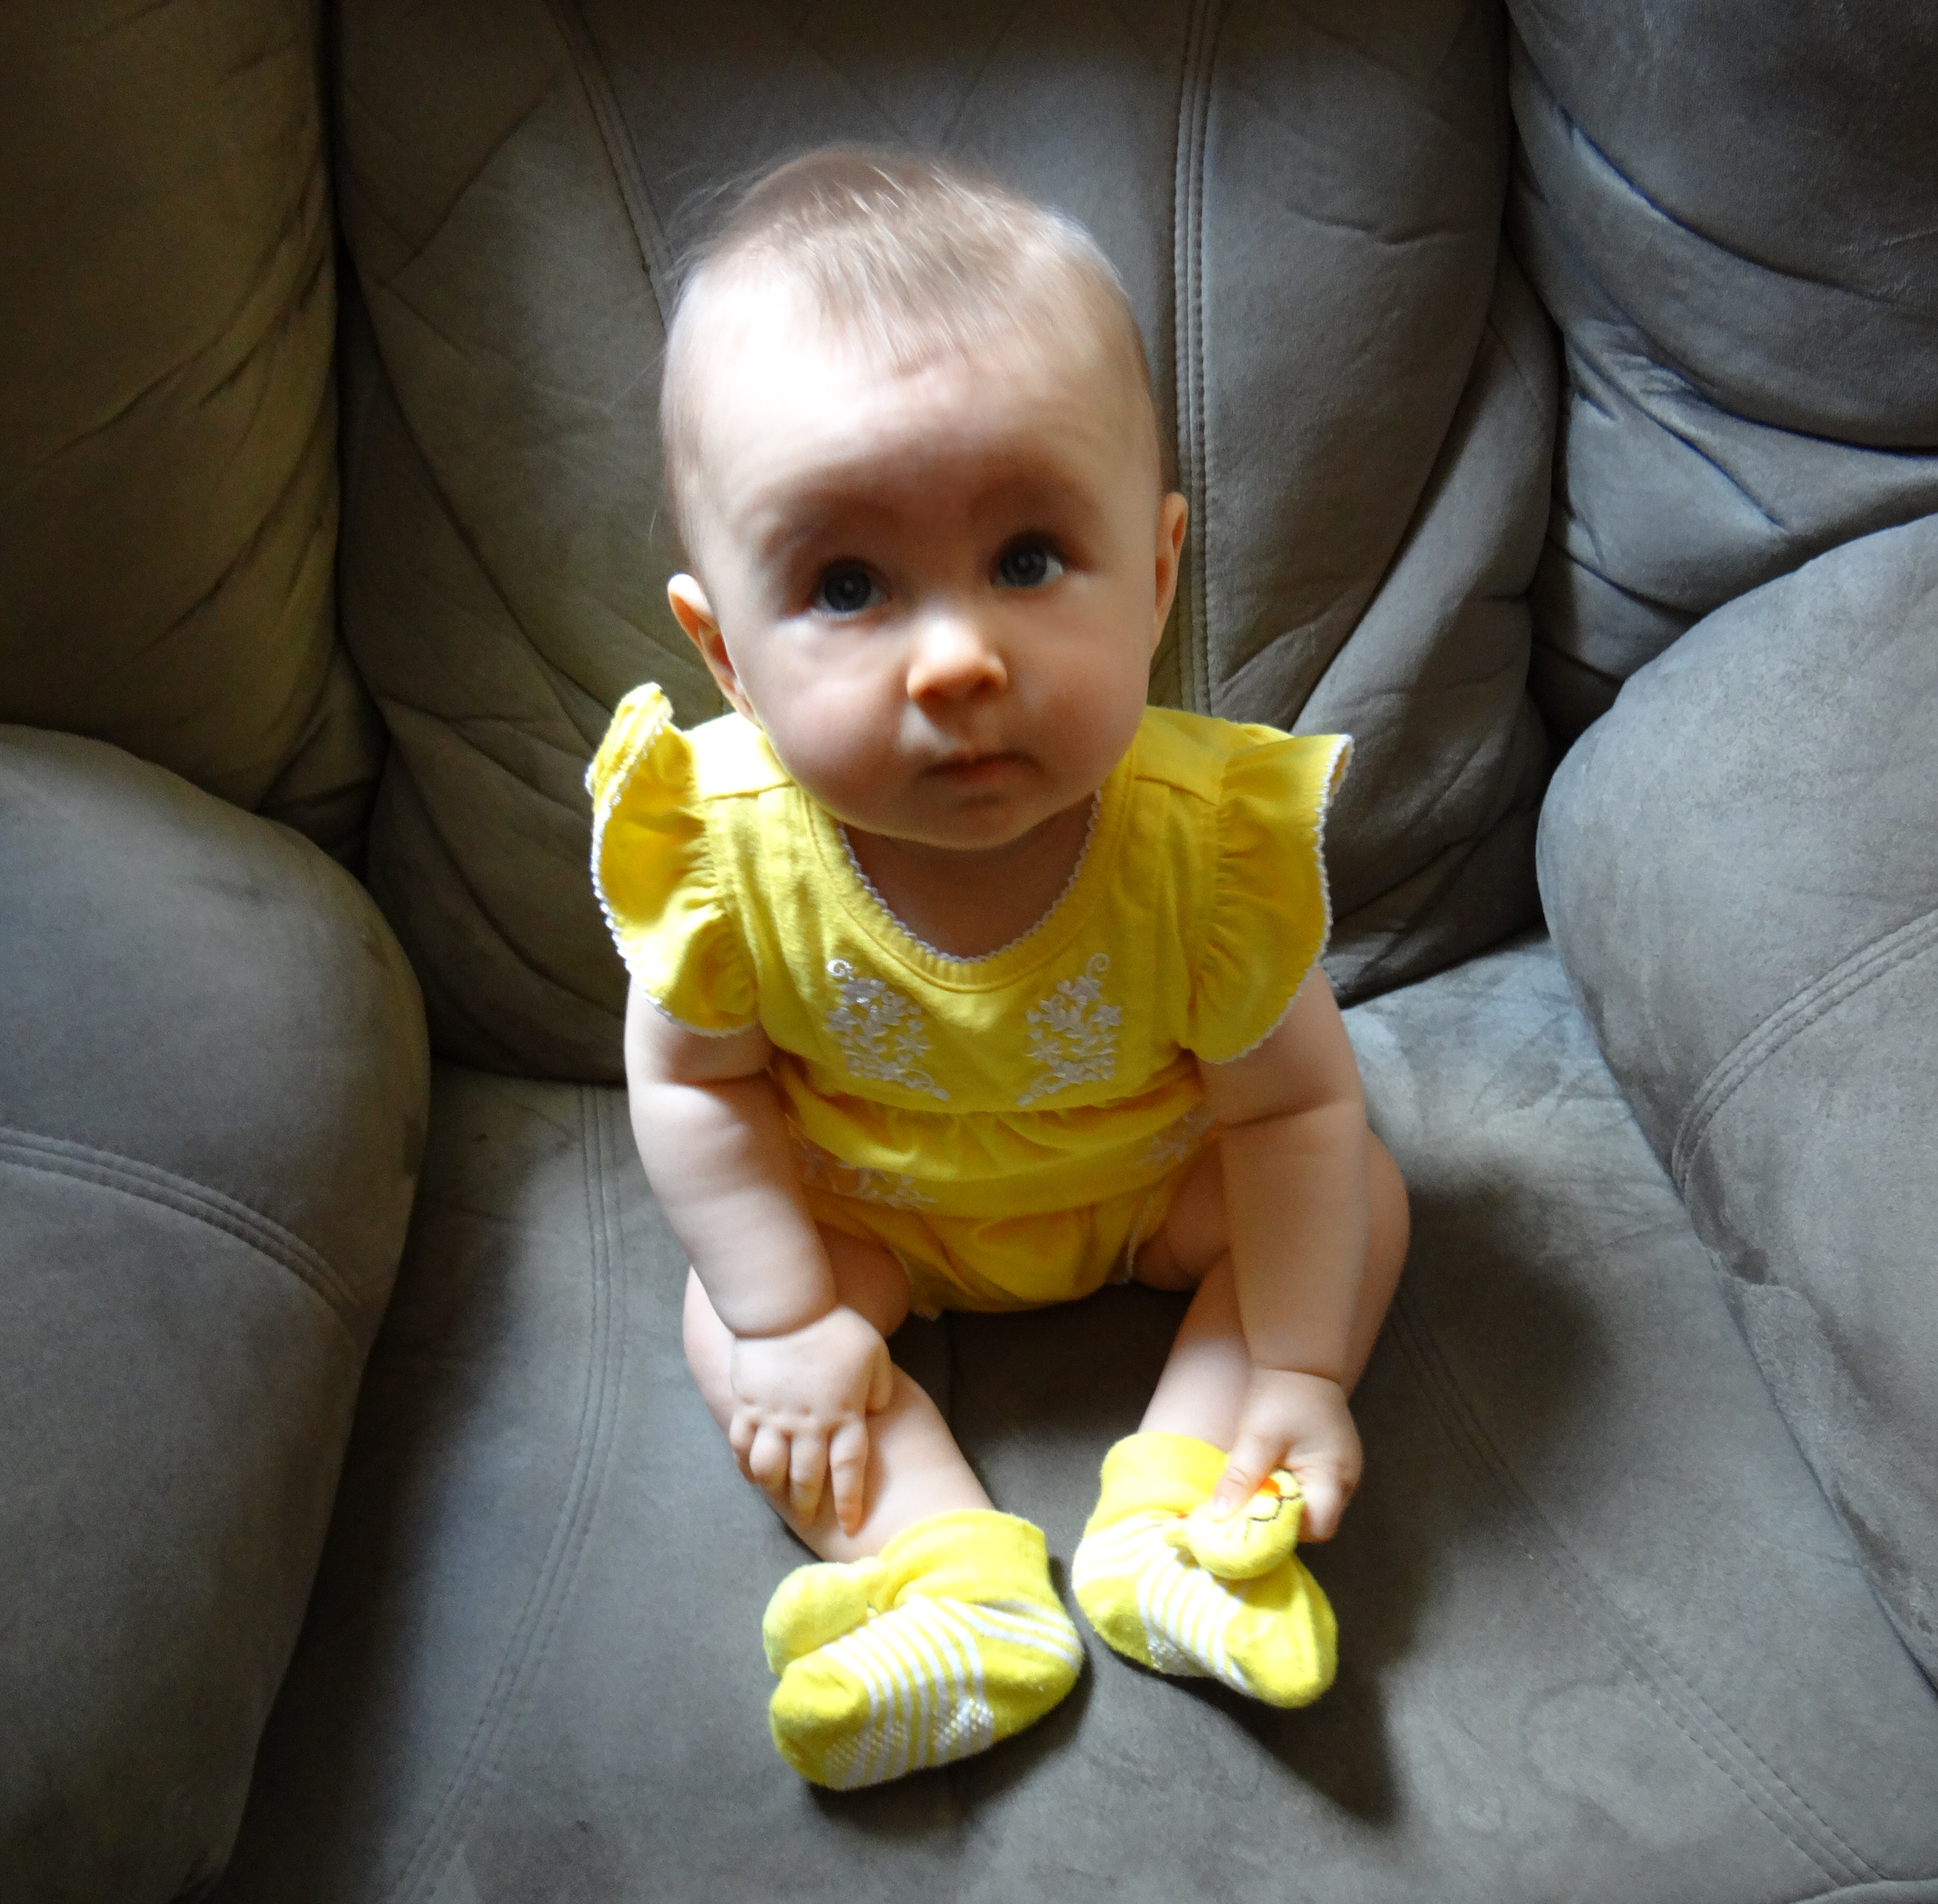 Adorable baby girl in a yellow outfit.